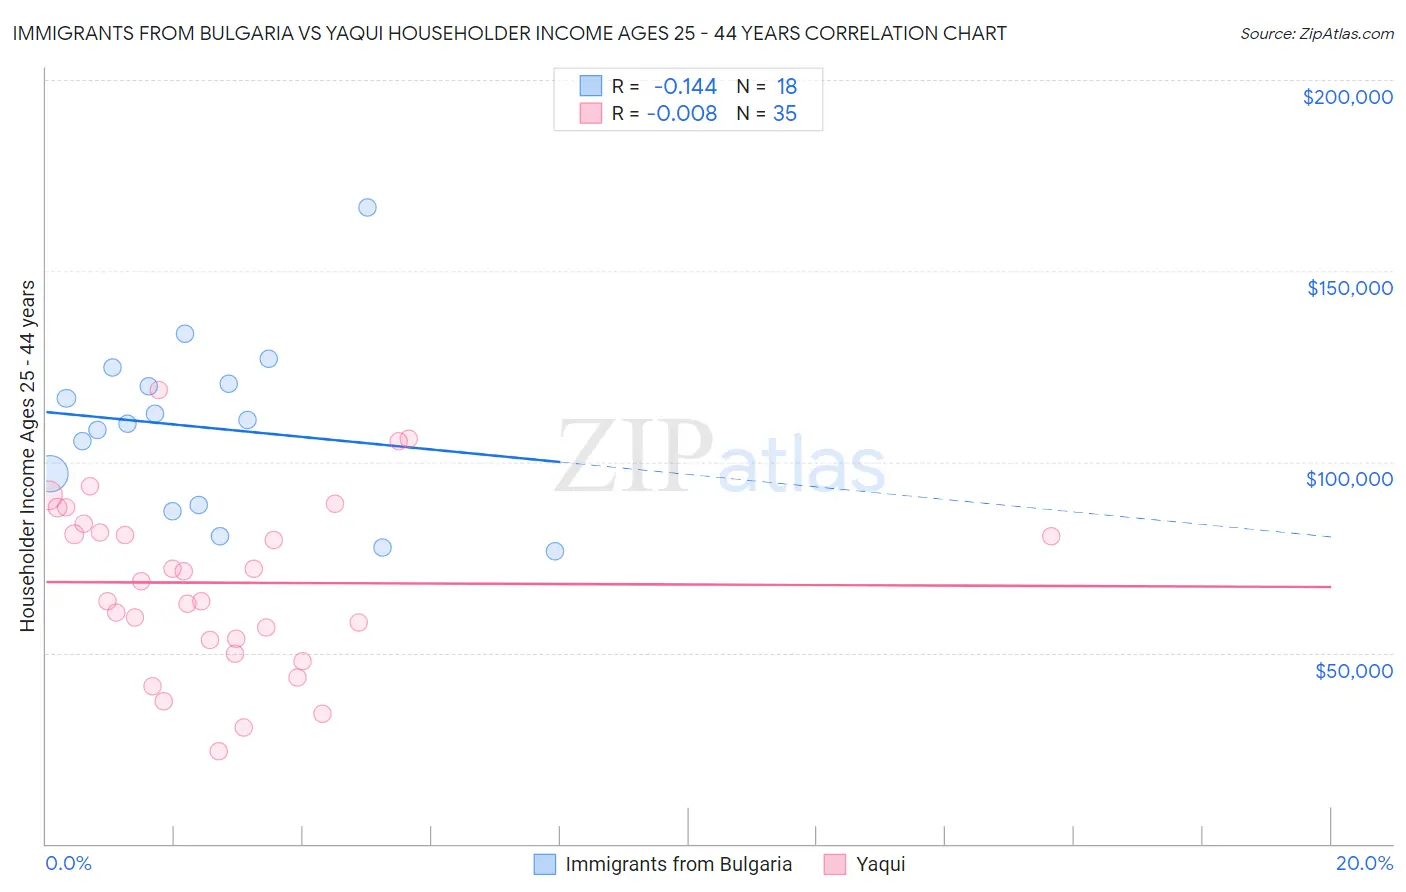 Immigrants from Bulgaria vs Yaqui Householder Income Ages 25 - 44 years